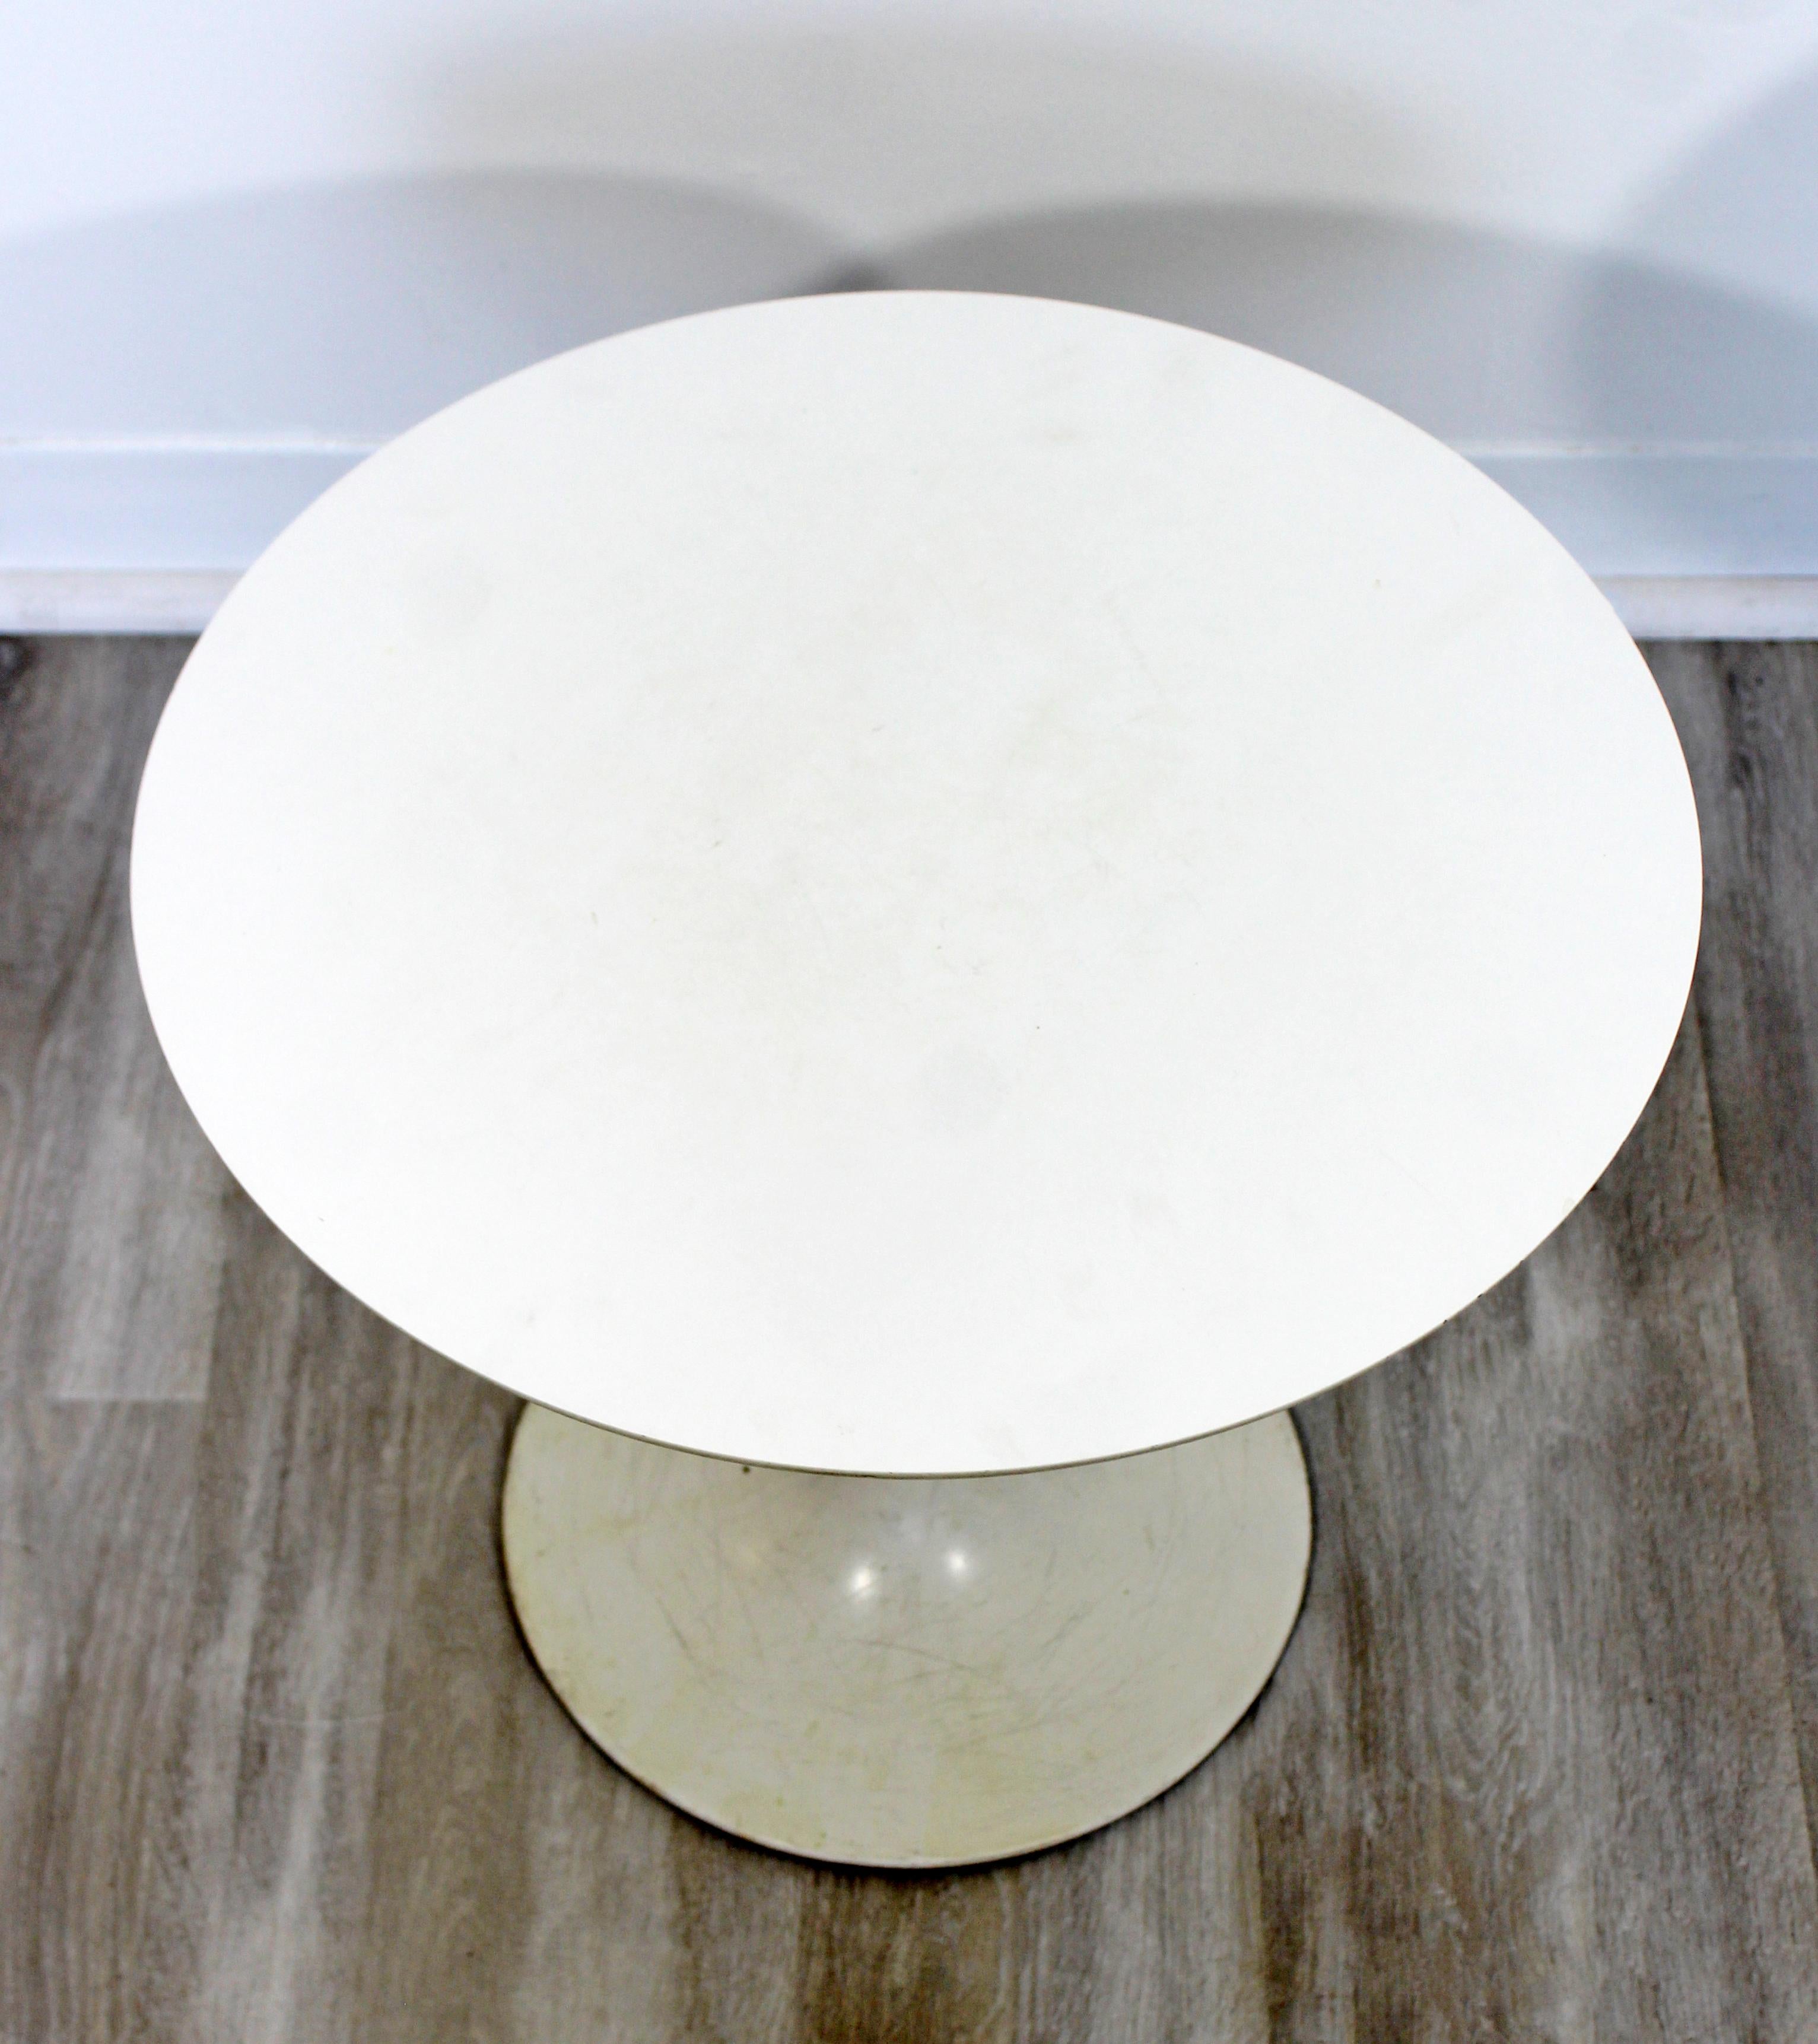 For your consideration is a Saarinen Knoll style, round, tulip shaped side or end table, circa 1960s. In very good vintage condition. The dimensions are 17.75